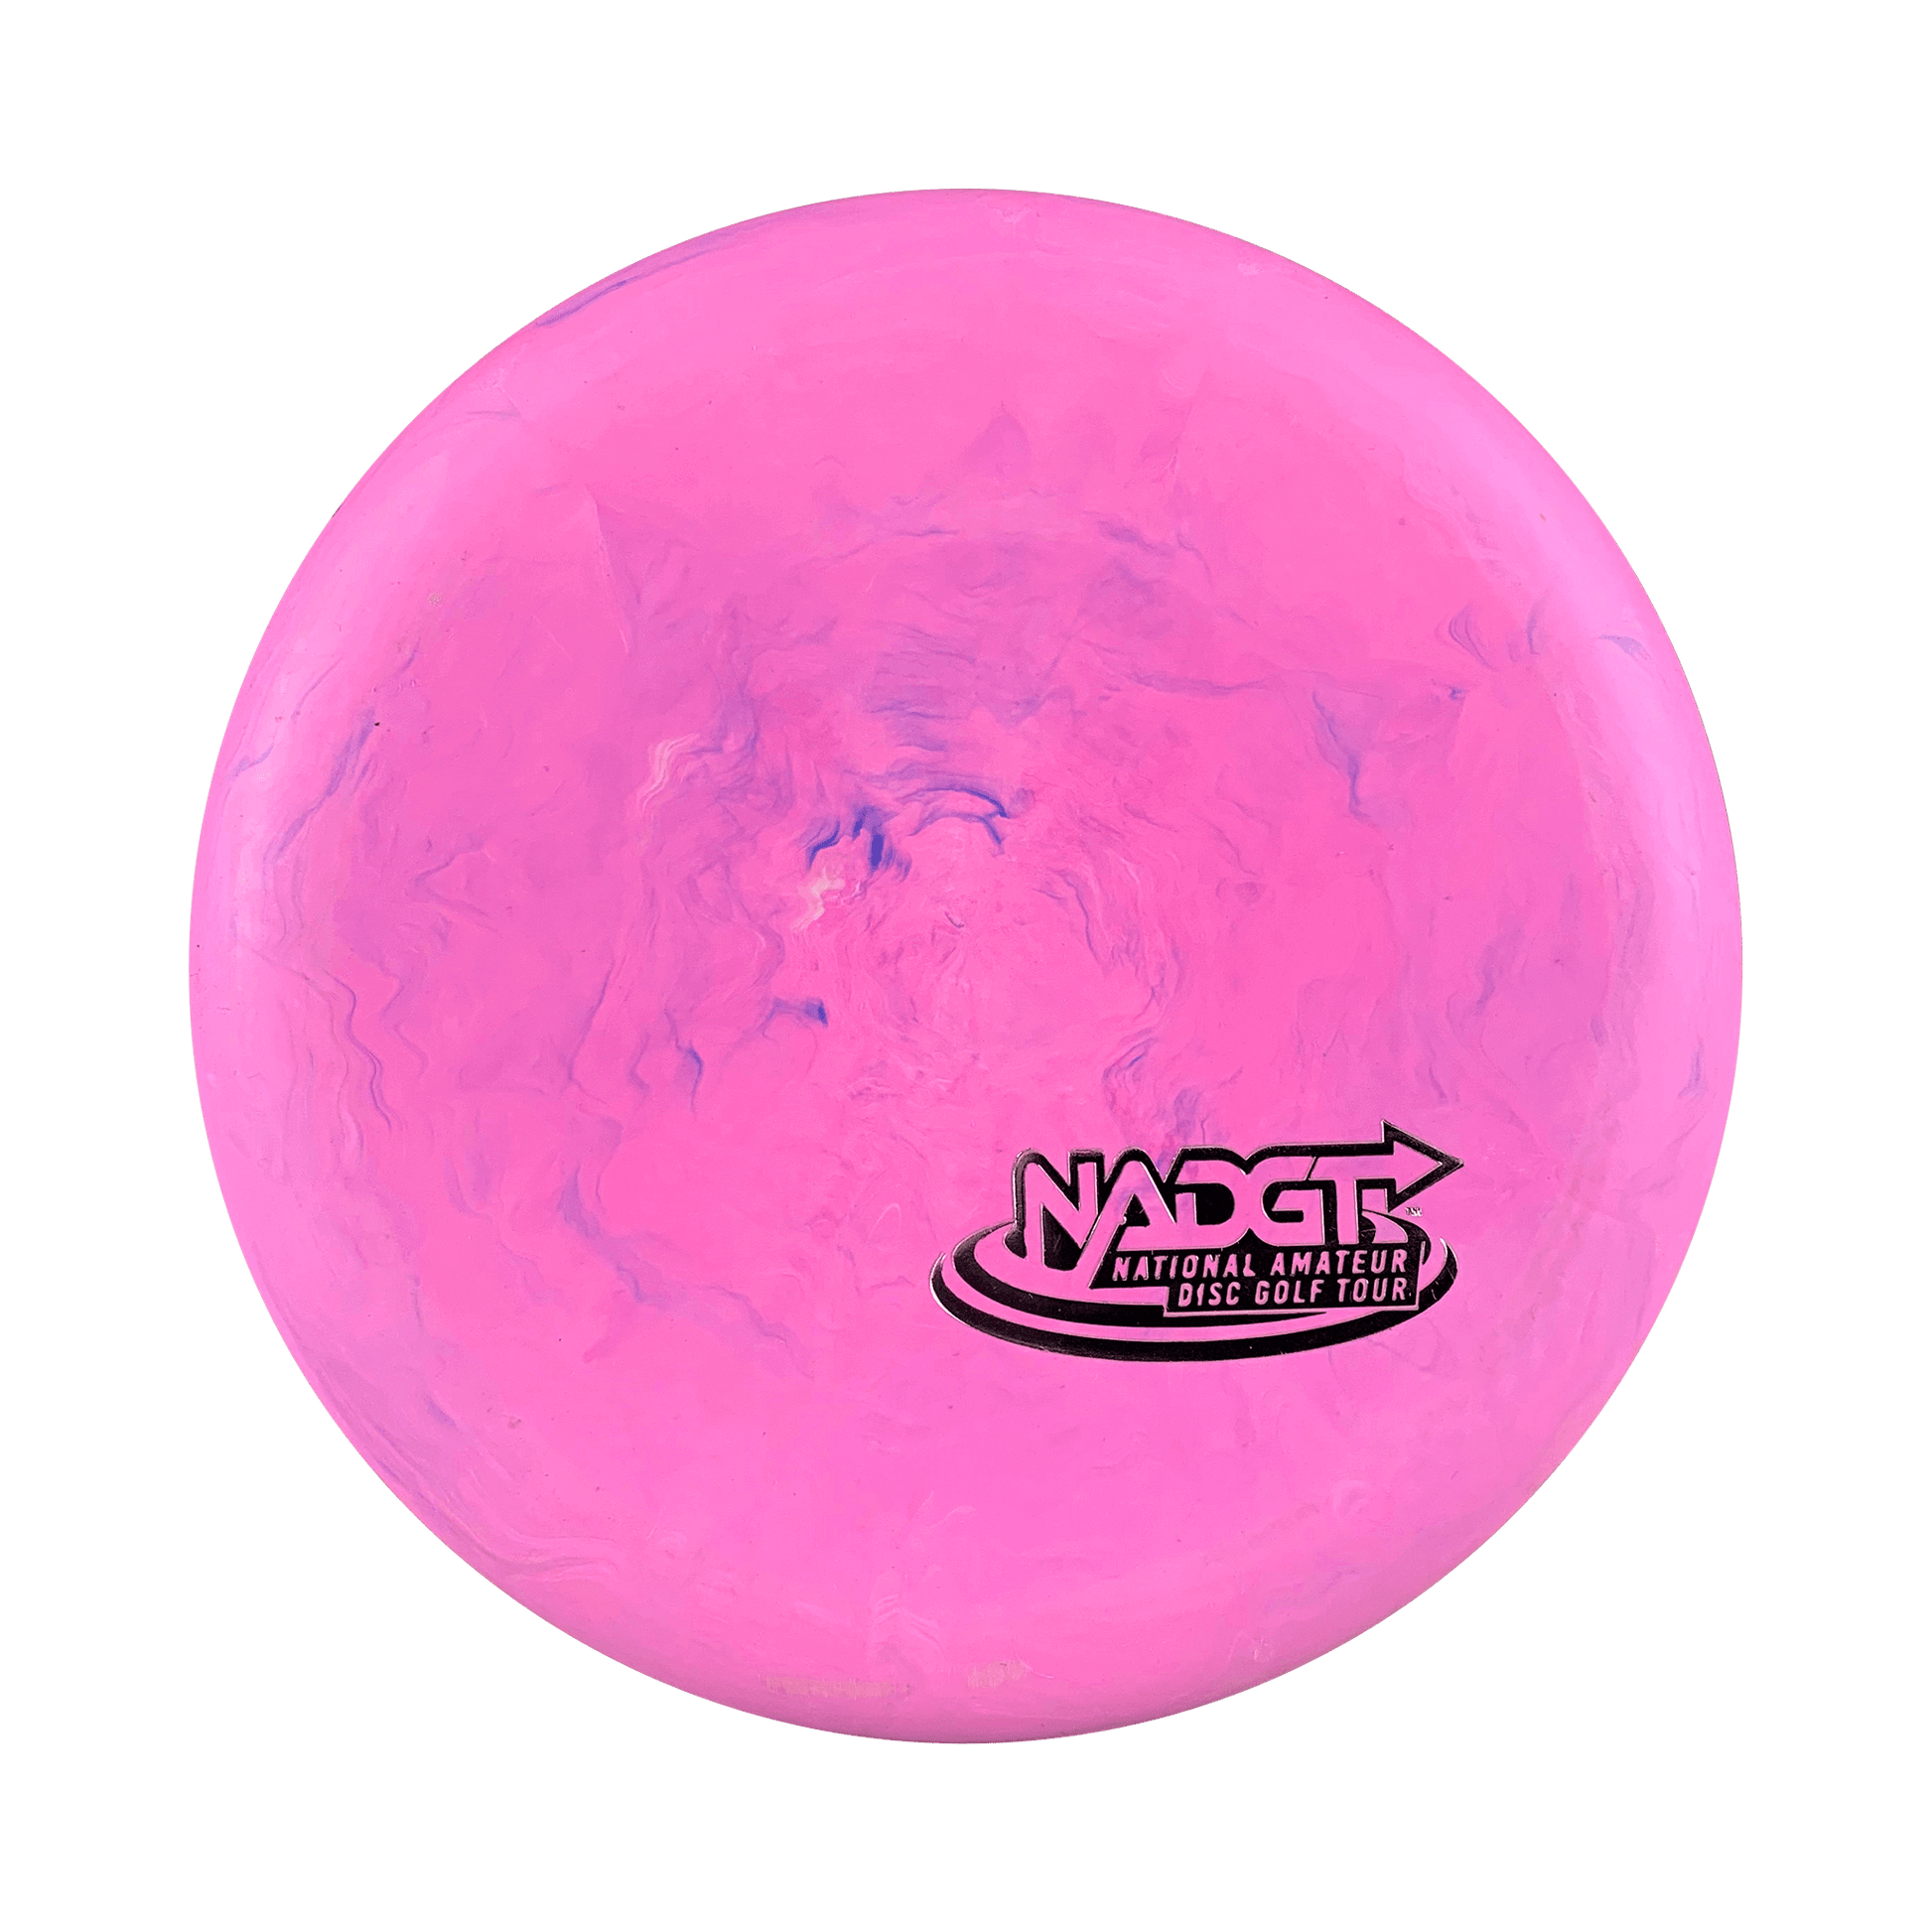 Firm Voodoo - Small NADGT Stamp Disc Gateway multi / hot pink 174 